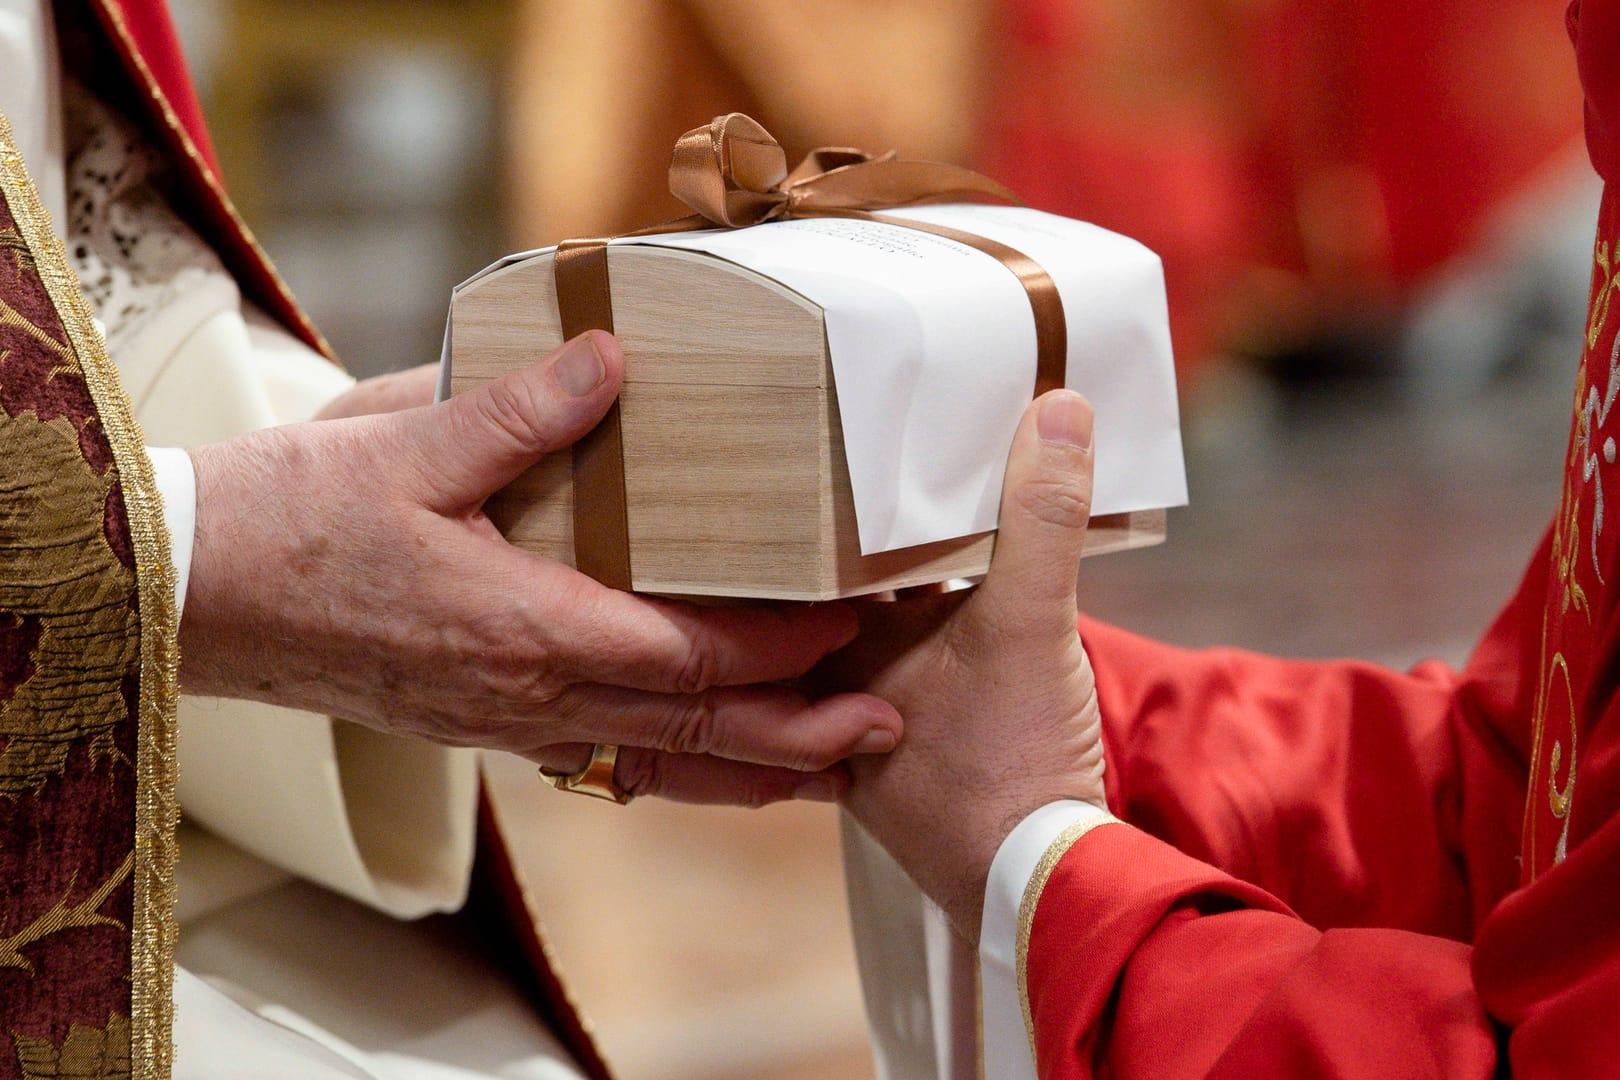 Pope at pallium Mass: Church must go out to ‘meet the world’